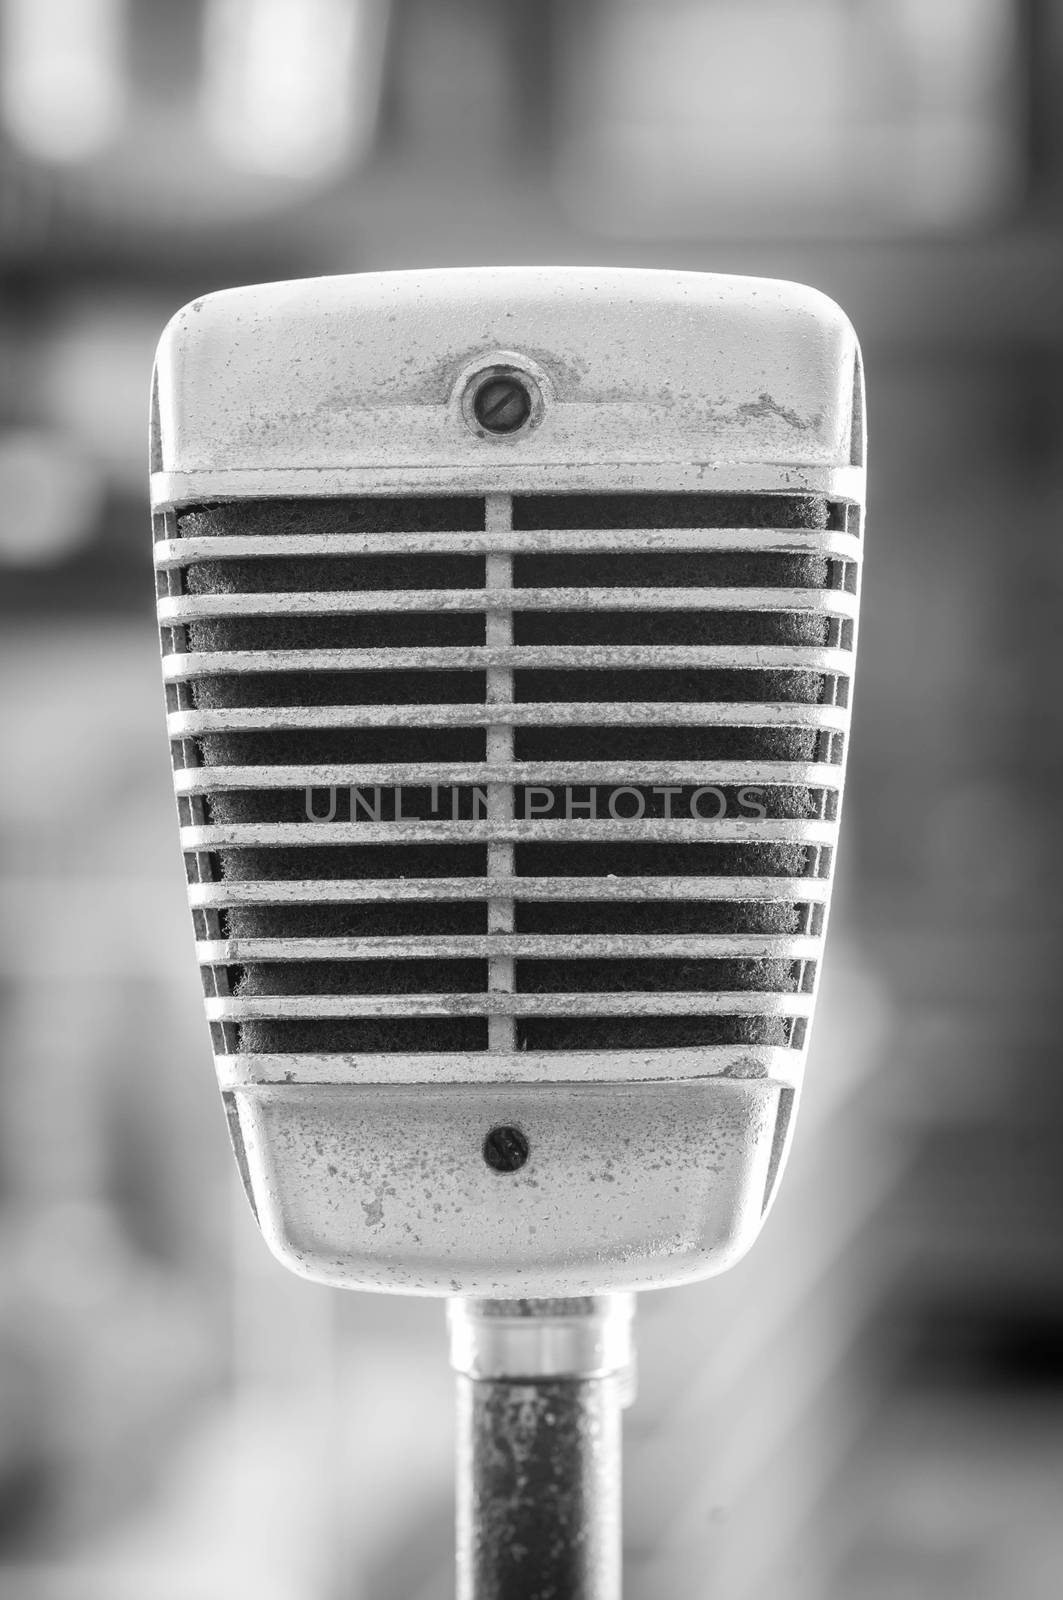 Retro microphone on blur background. Black and white color.